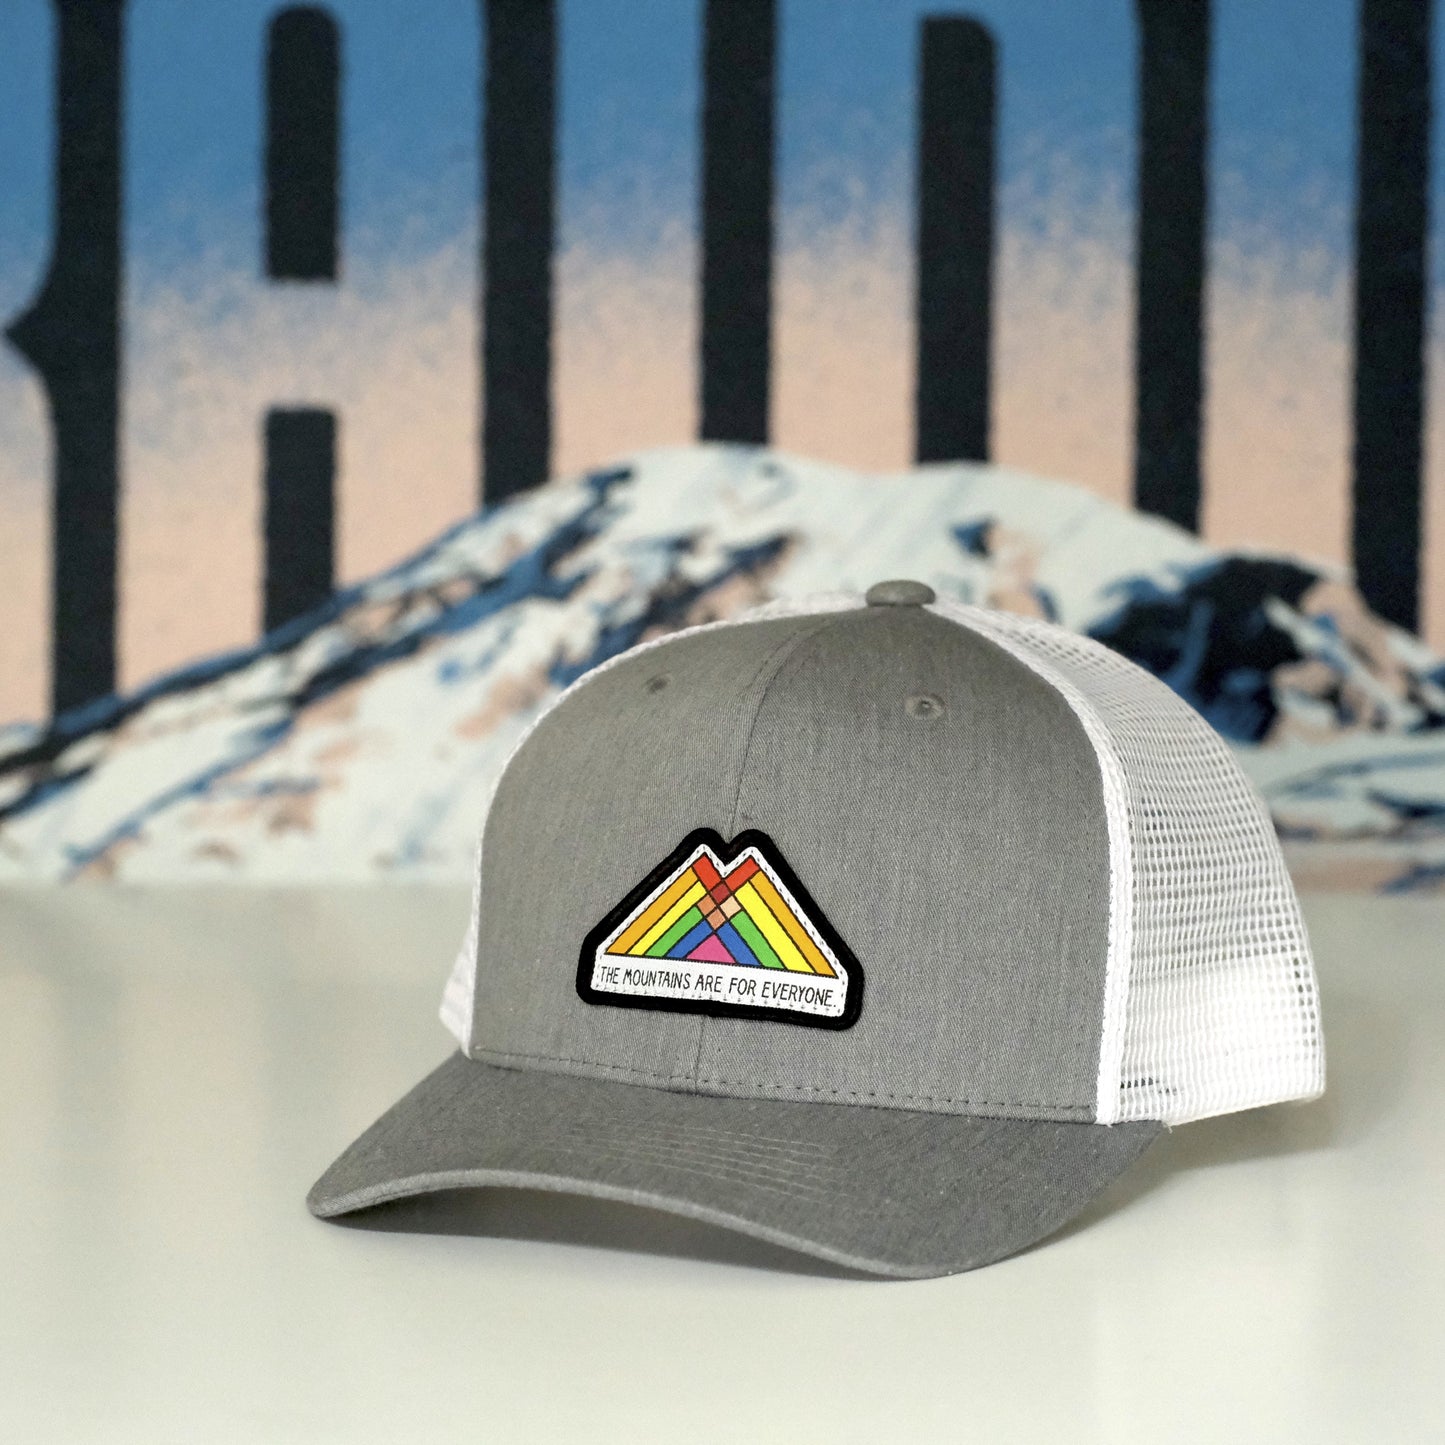 The Mountains Are For Everyone Trucker Patch Cap